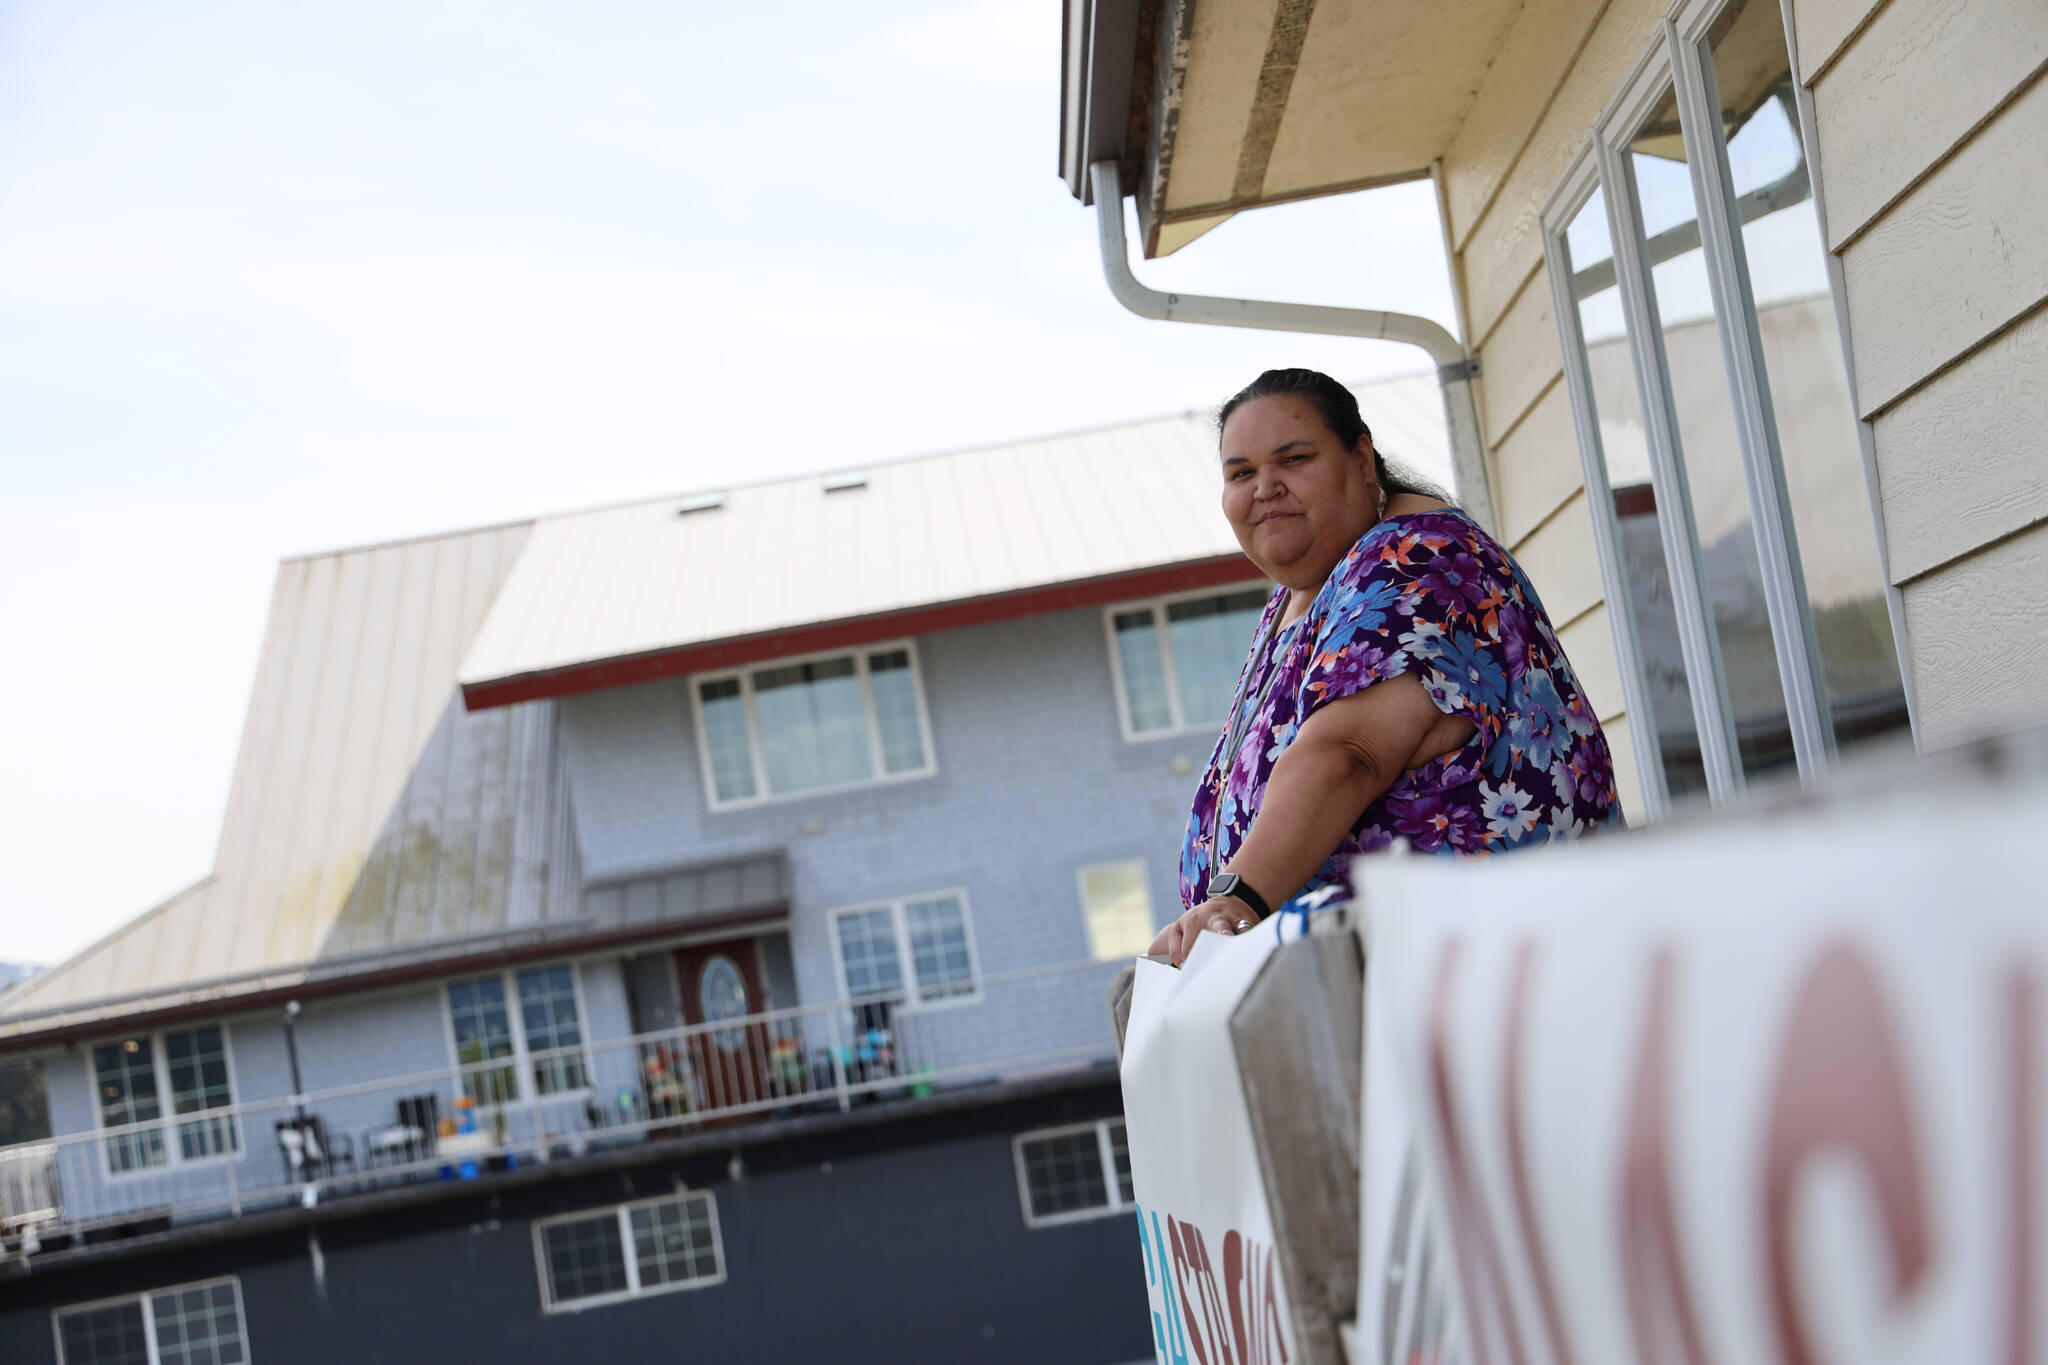 Award-winning Juneau writer Vera Starbard stands on her balcony on Douglas Island that displays banners across Gastineau Channel in support of the Writer’s Guild of America union strike currently going on across Hollywood and the country. (Clarise Larson / Juneau Empire)